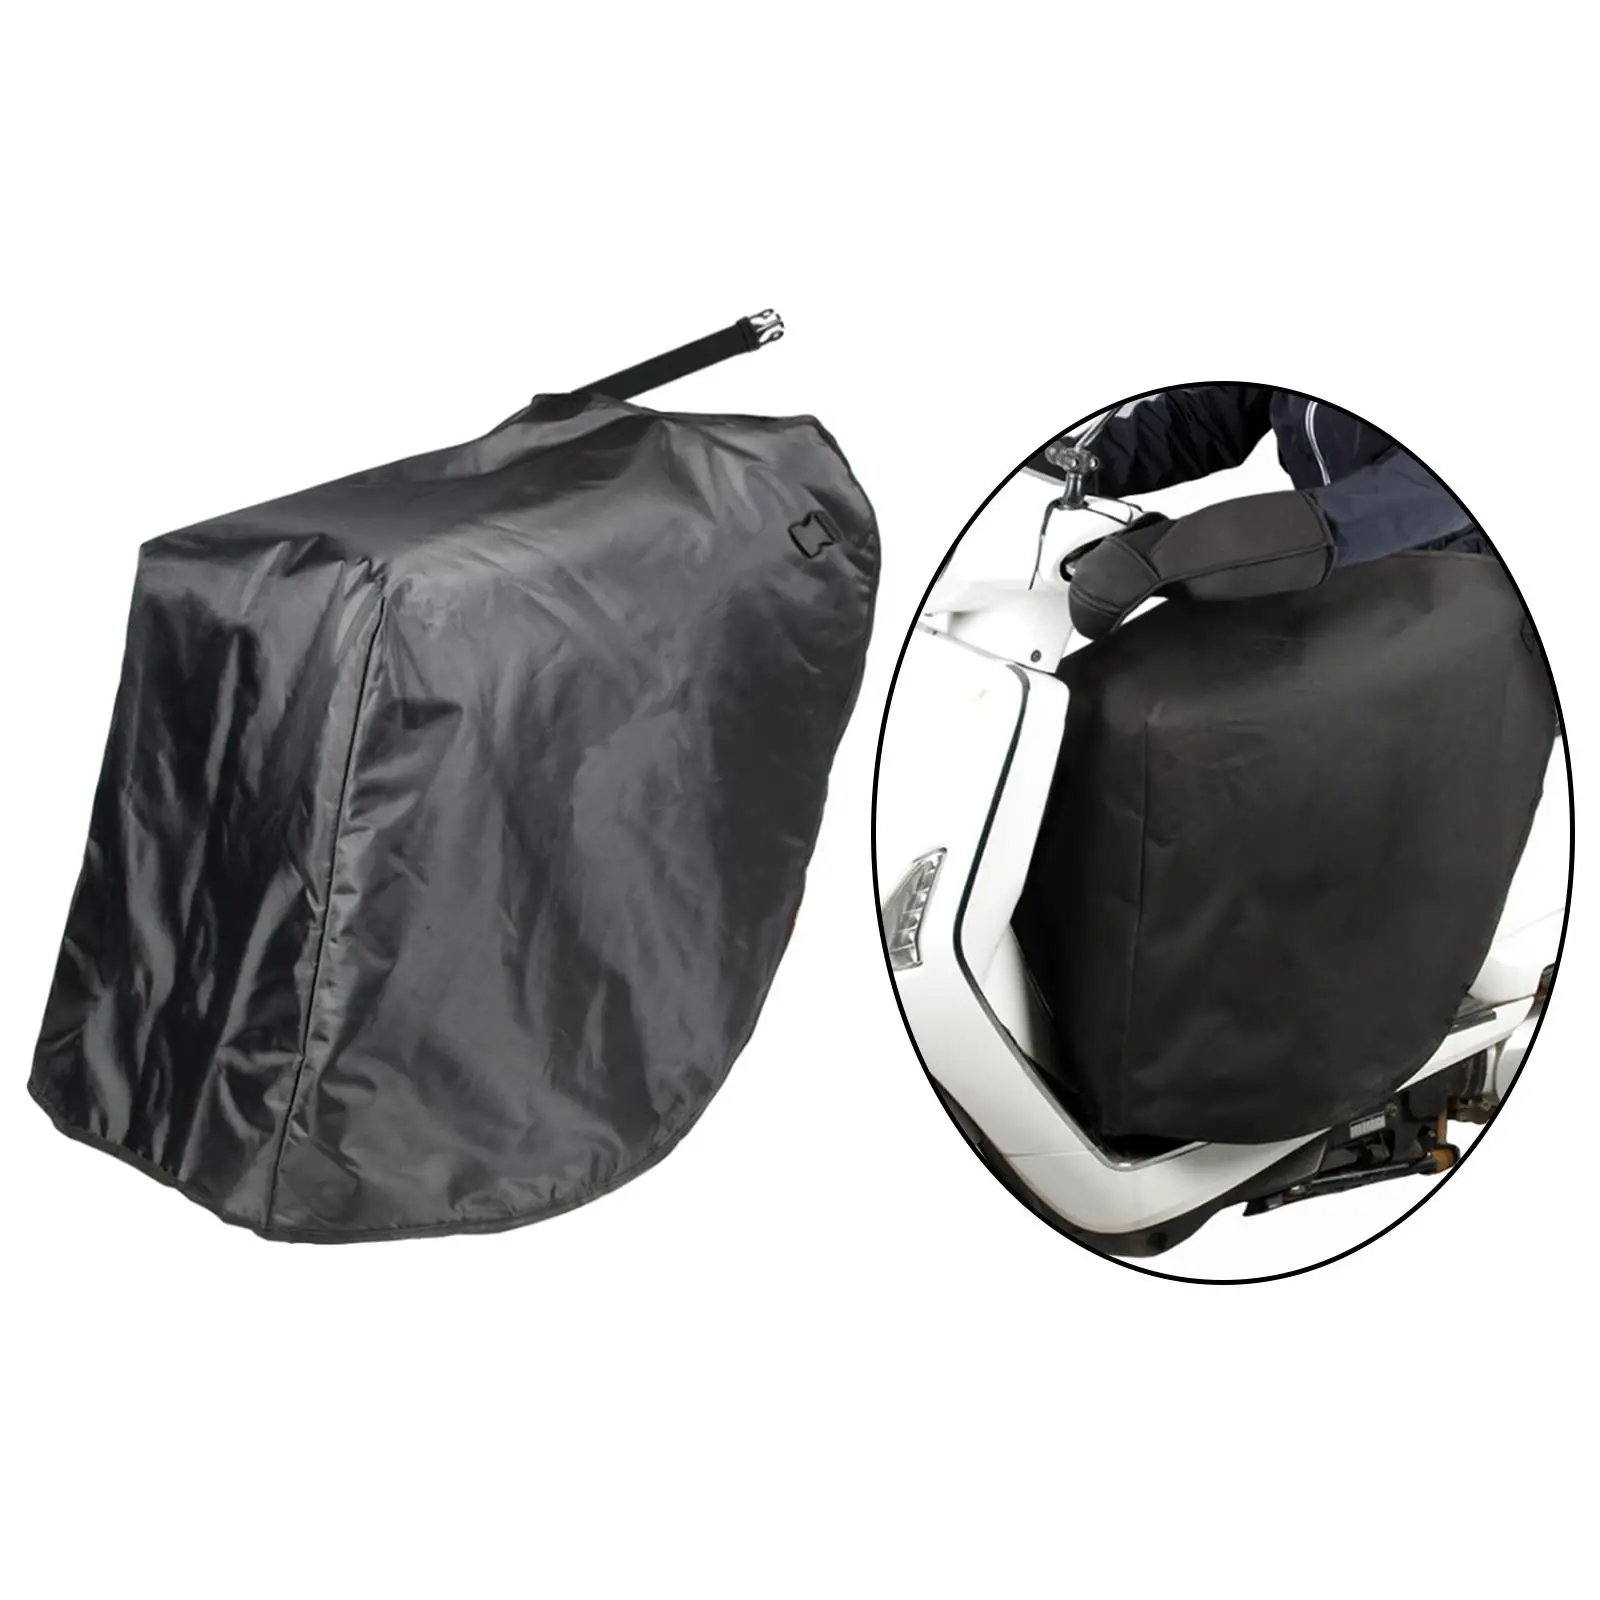 Motorcycle Windproof Quilt, ,Electric Car Windshield by Autumn/ Velvet Thickening Waterproof Cold Warmth Quilt Rain Cover